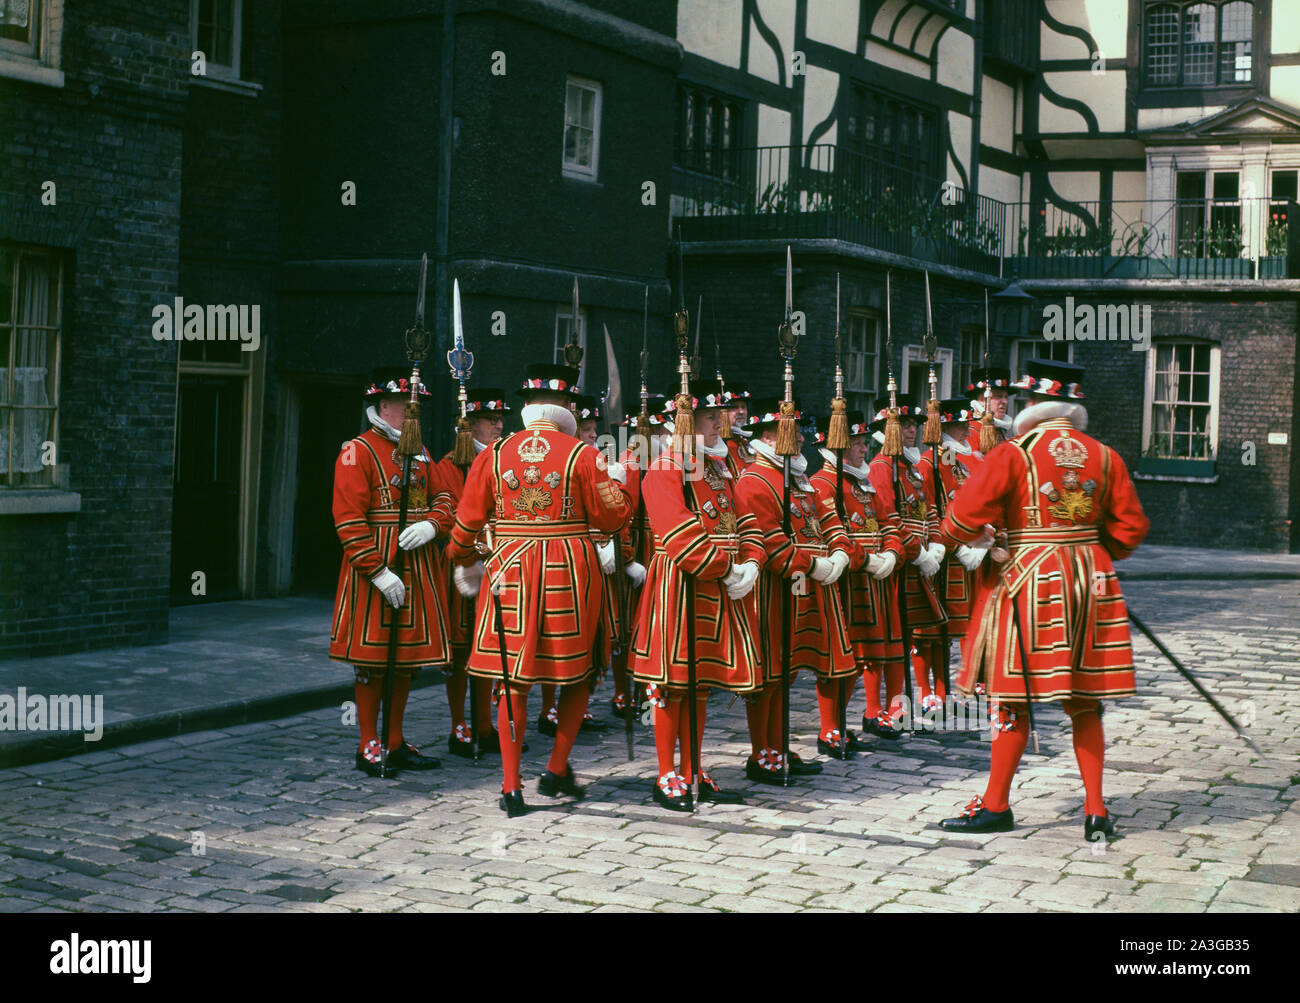 1960s, historical picture of Yeomen Warders in Tudor state dress. The warders are ceremonial guardians of the Fortress of the Tower of London, a duty dating back to Tudor times. All warders are retired from the Armed Forces of Commonwealth realms. Stock Photo